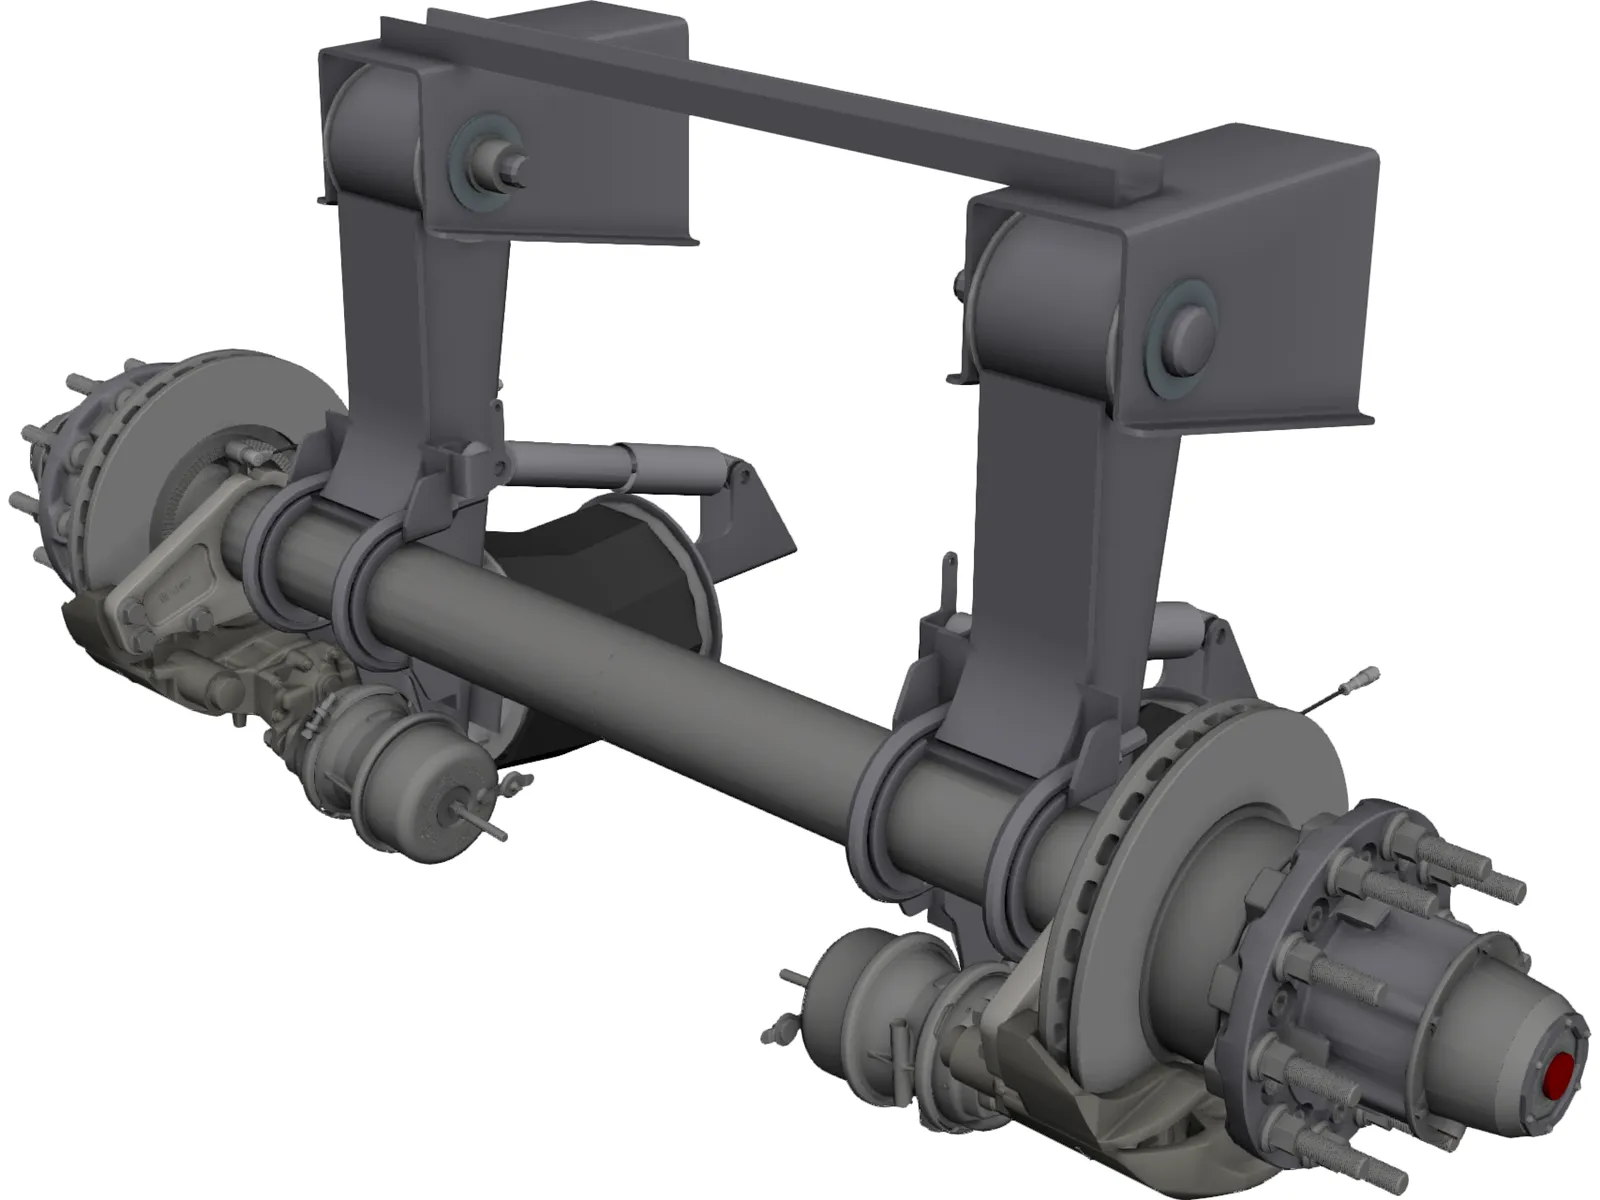 Truck Axle with Brakes 3D Model